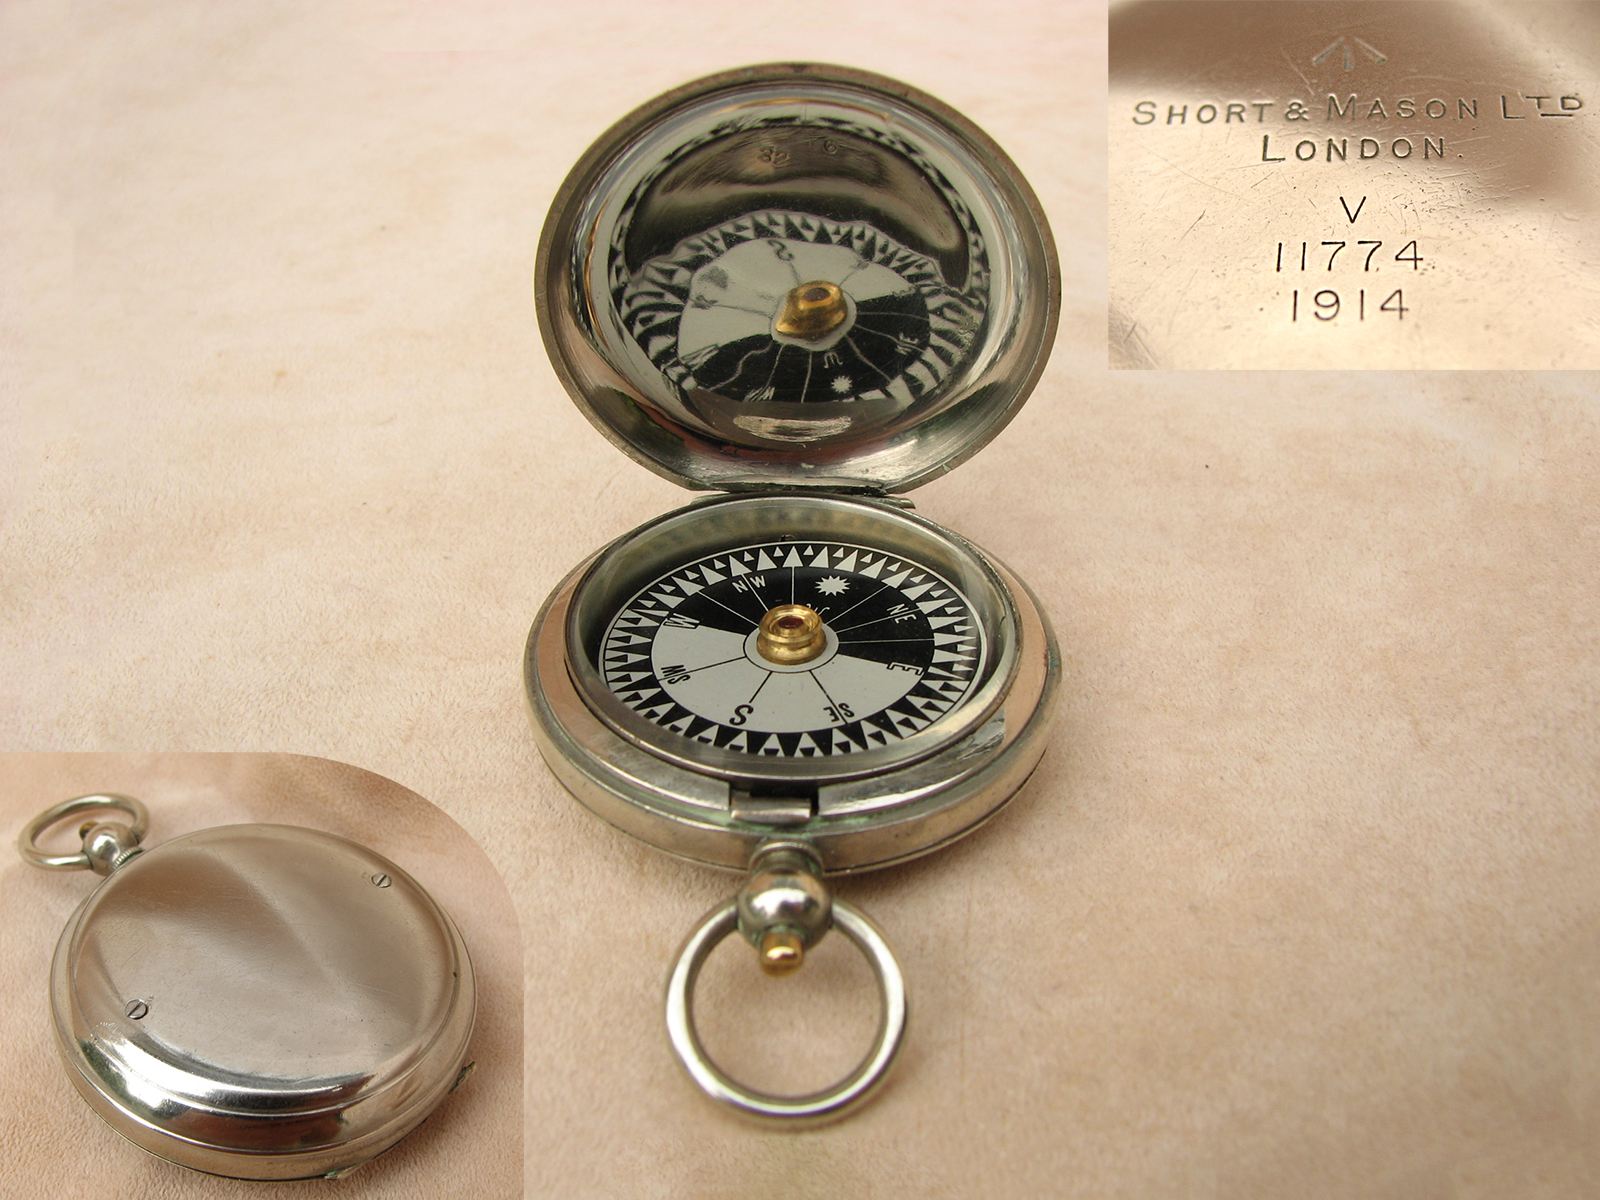 WW1 Short & Mason MK V Military Officers compass dated 1914